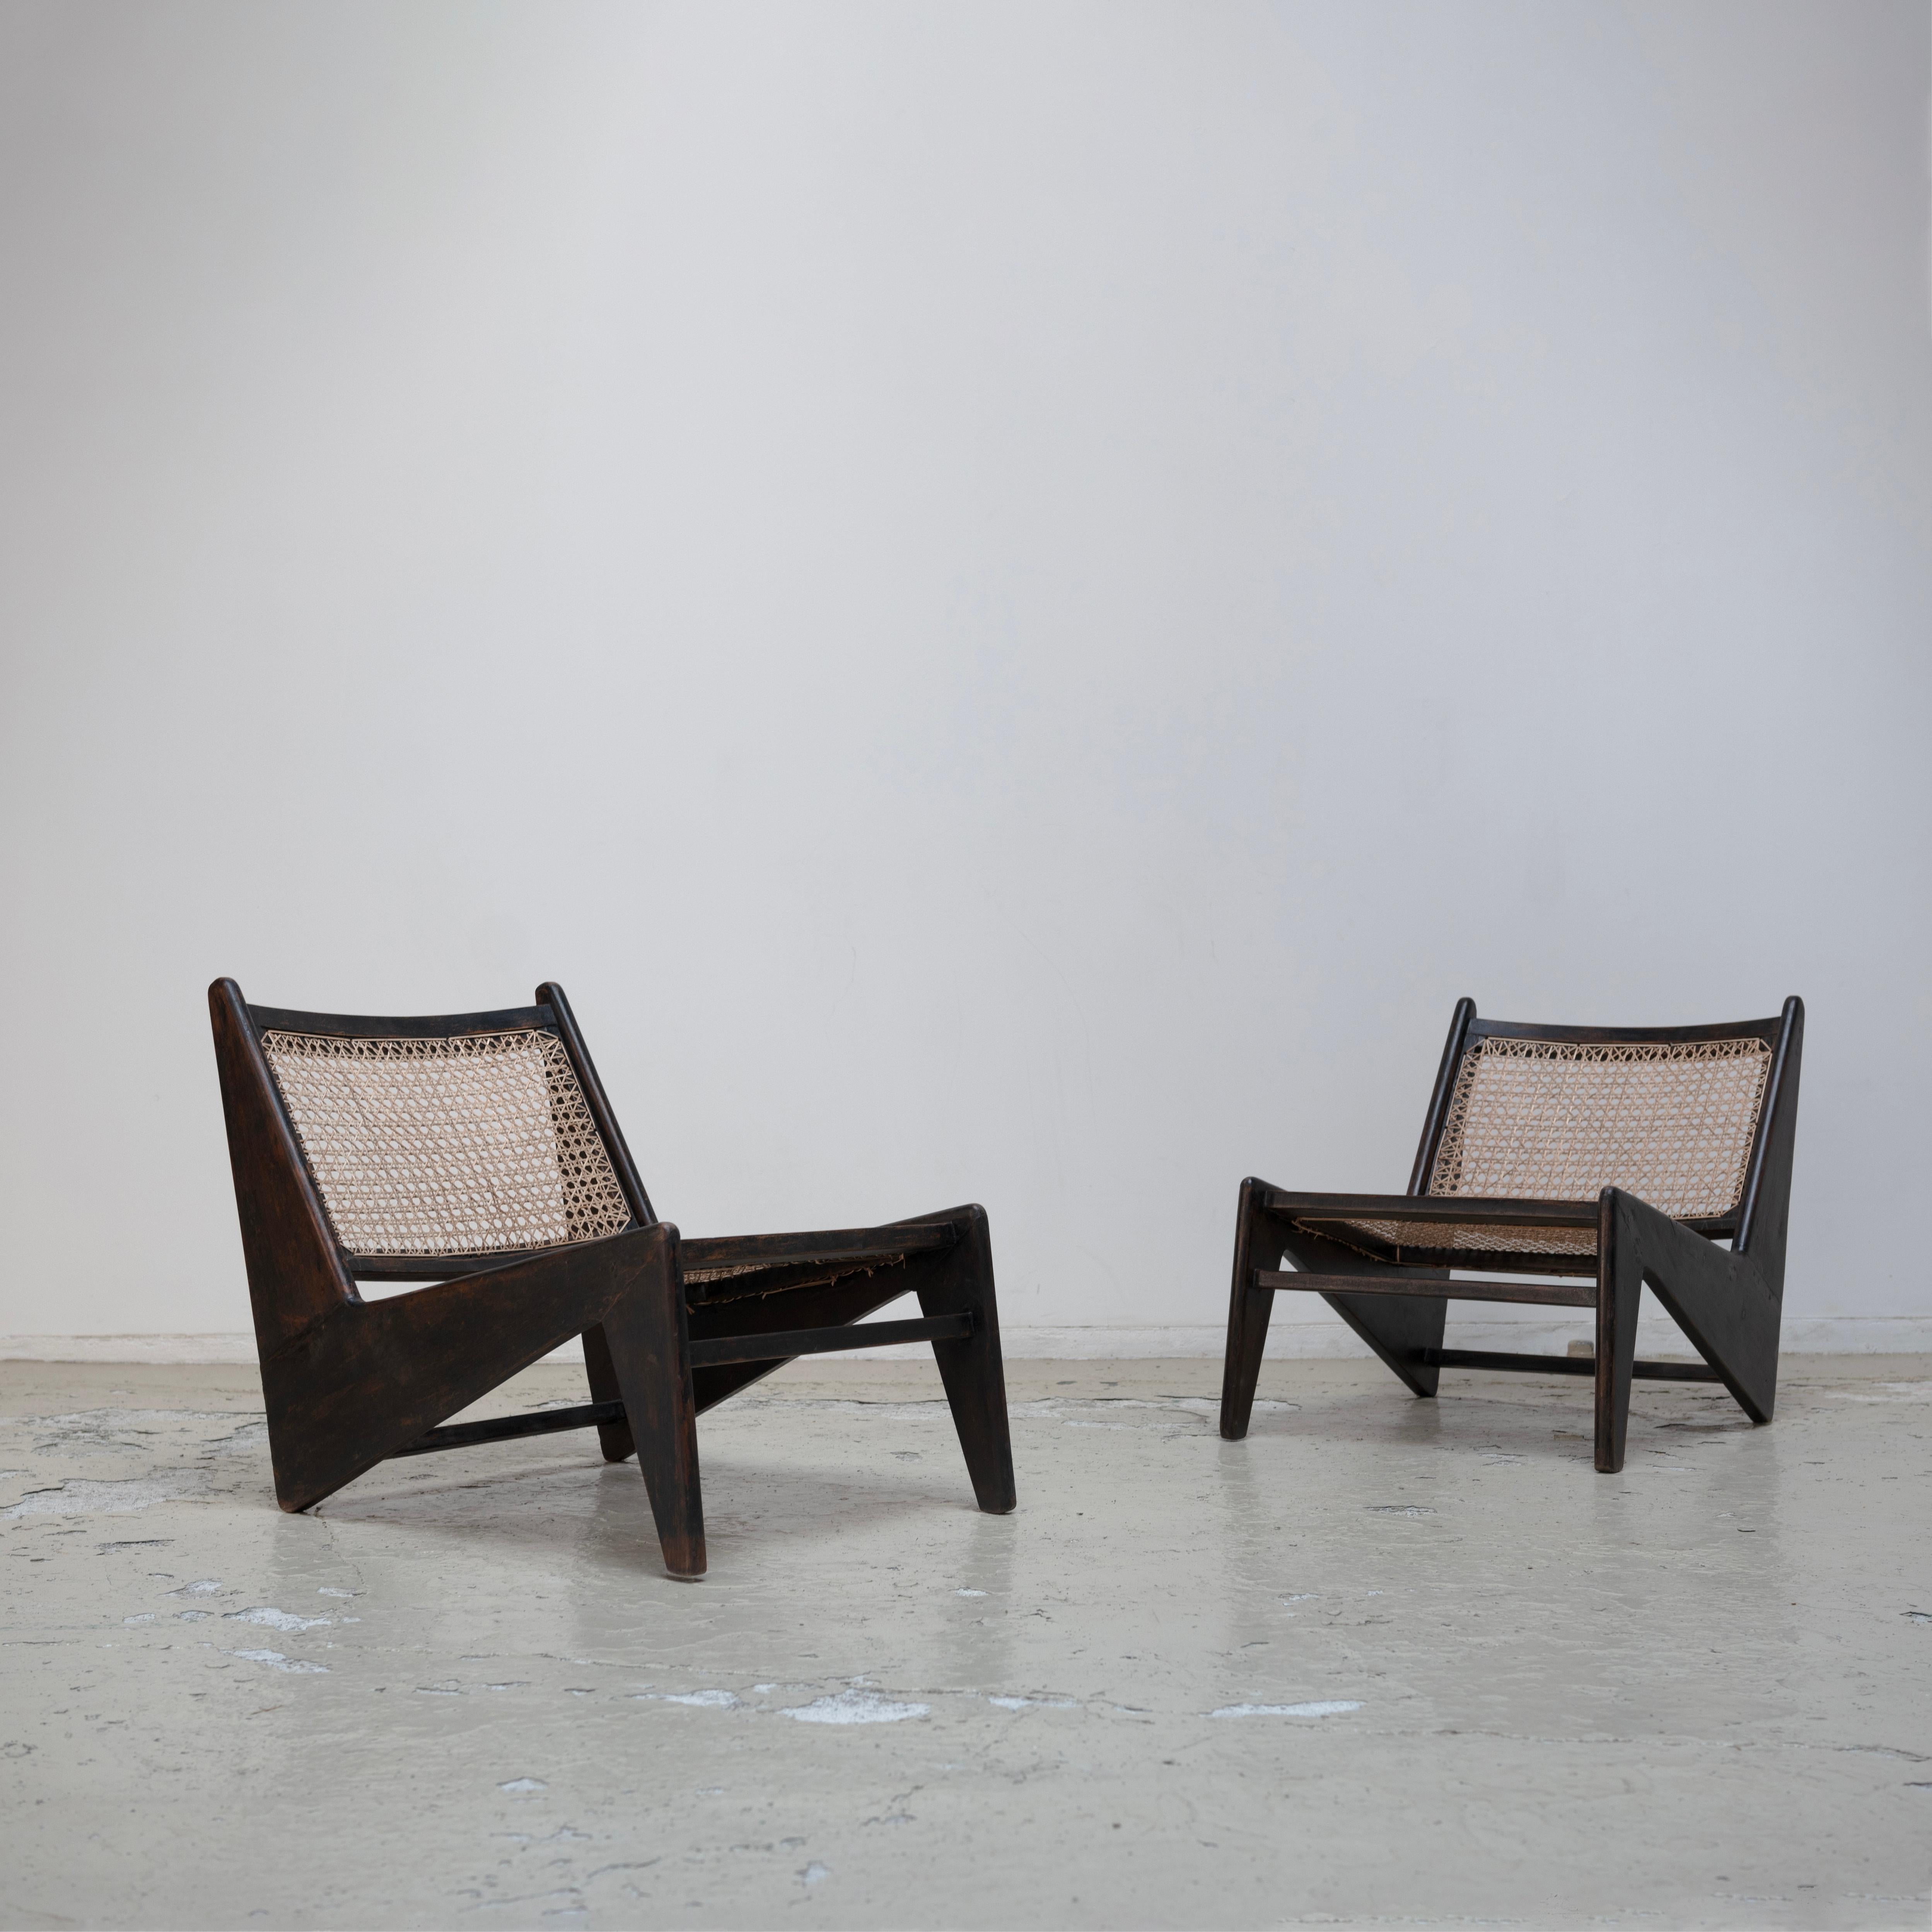 Pierre Jeanneret , Black Kangaroo Chair for Chandigarh, Teak , 1950s
It is very rare.
The price for a set of 2 chairs.